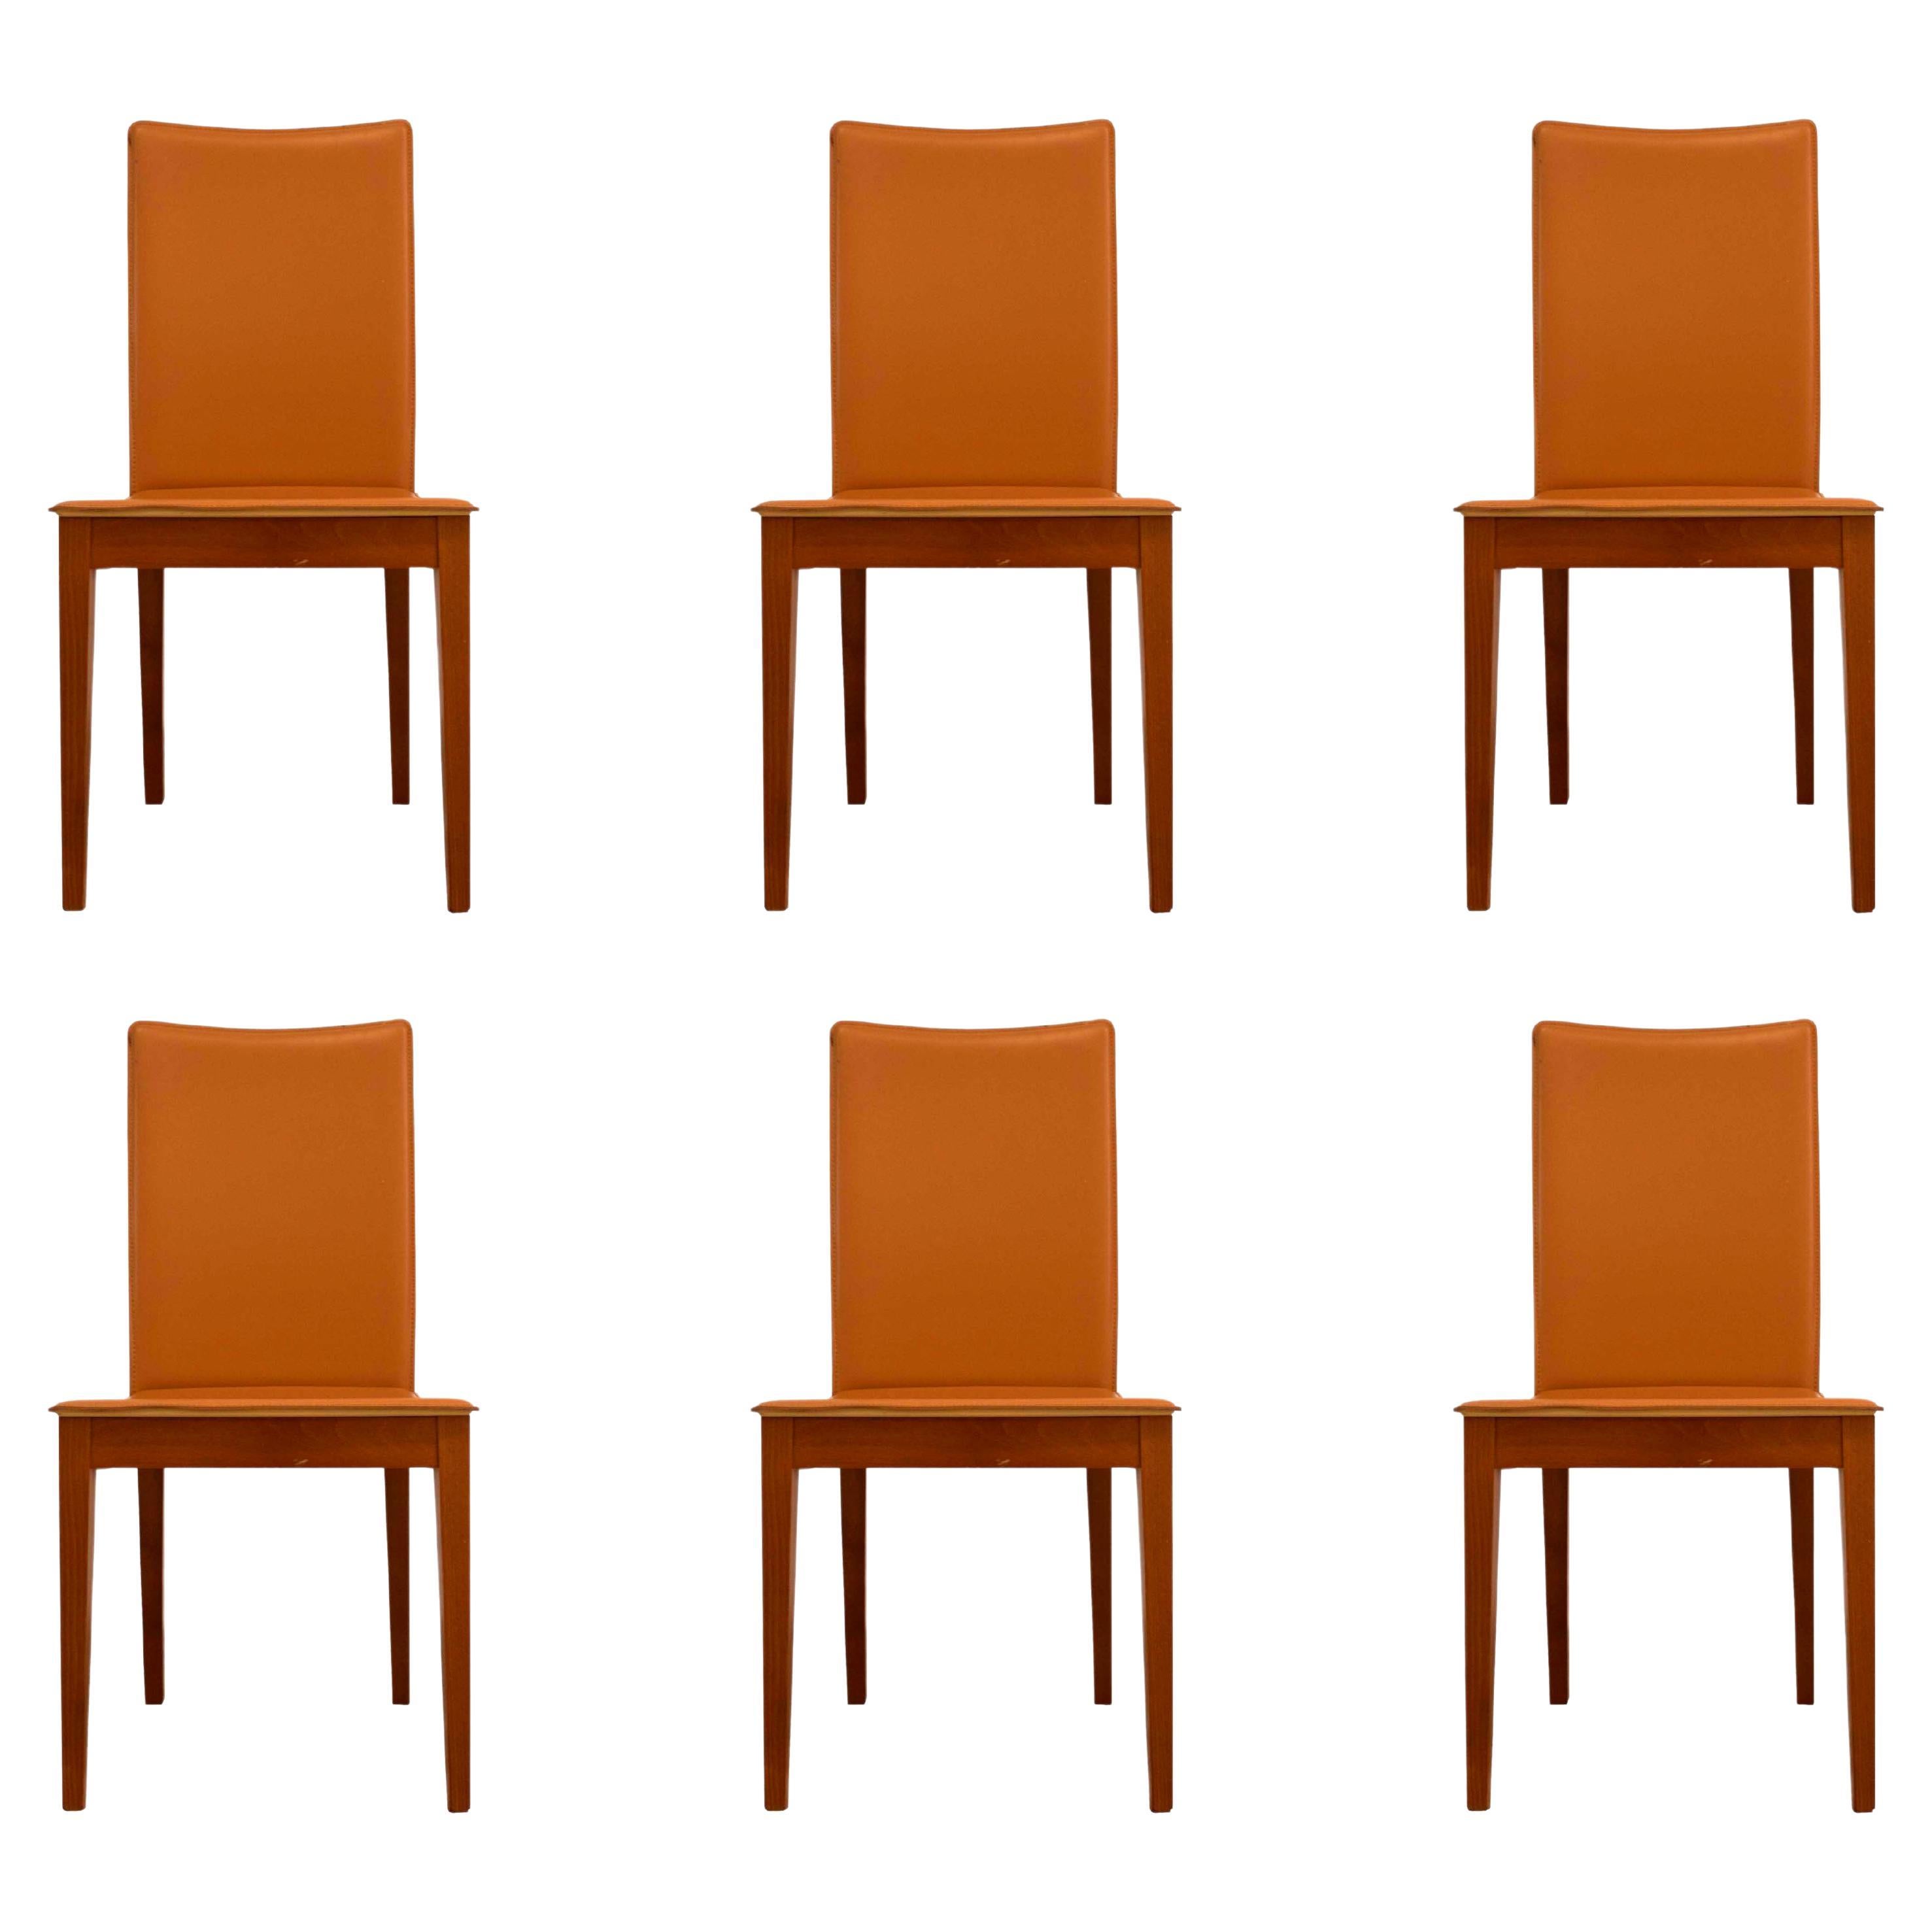 Set of 6 Calligaris Leather Italian Dining Chairs in Umber Modern Contemporary